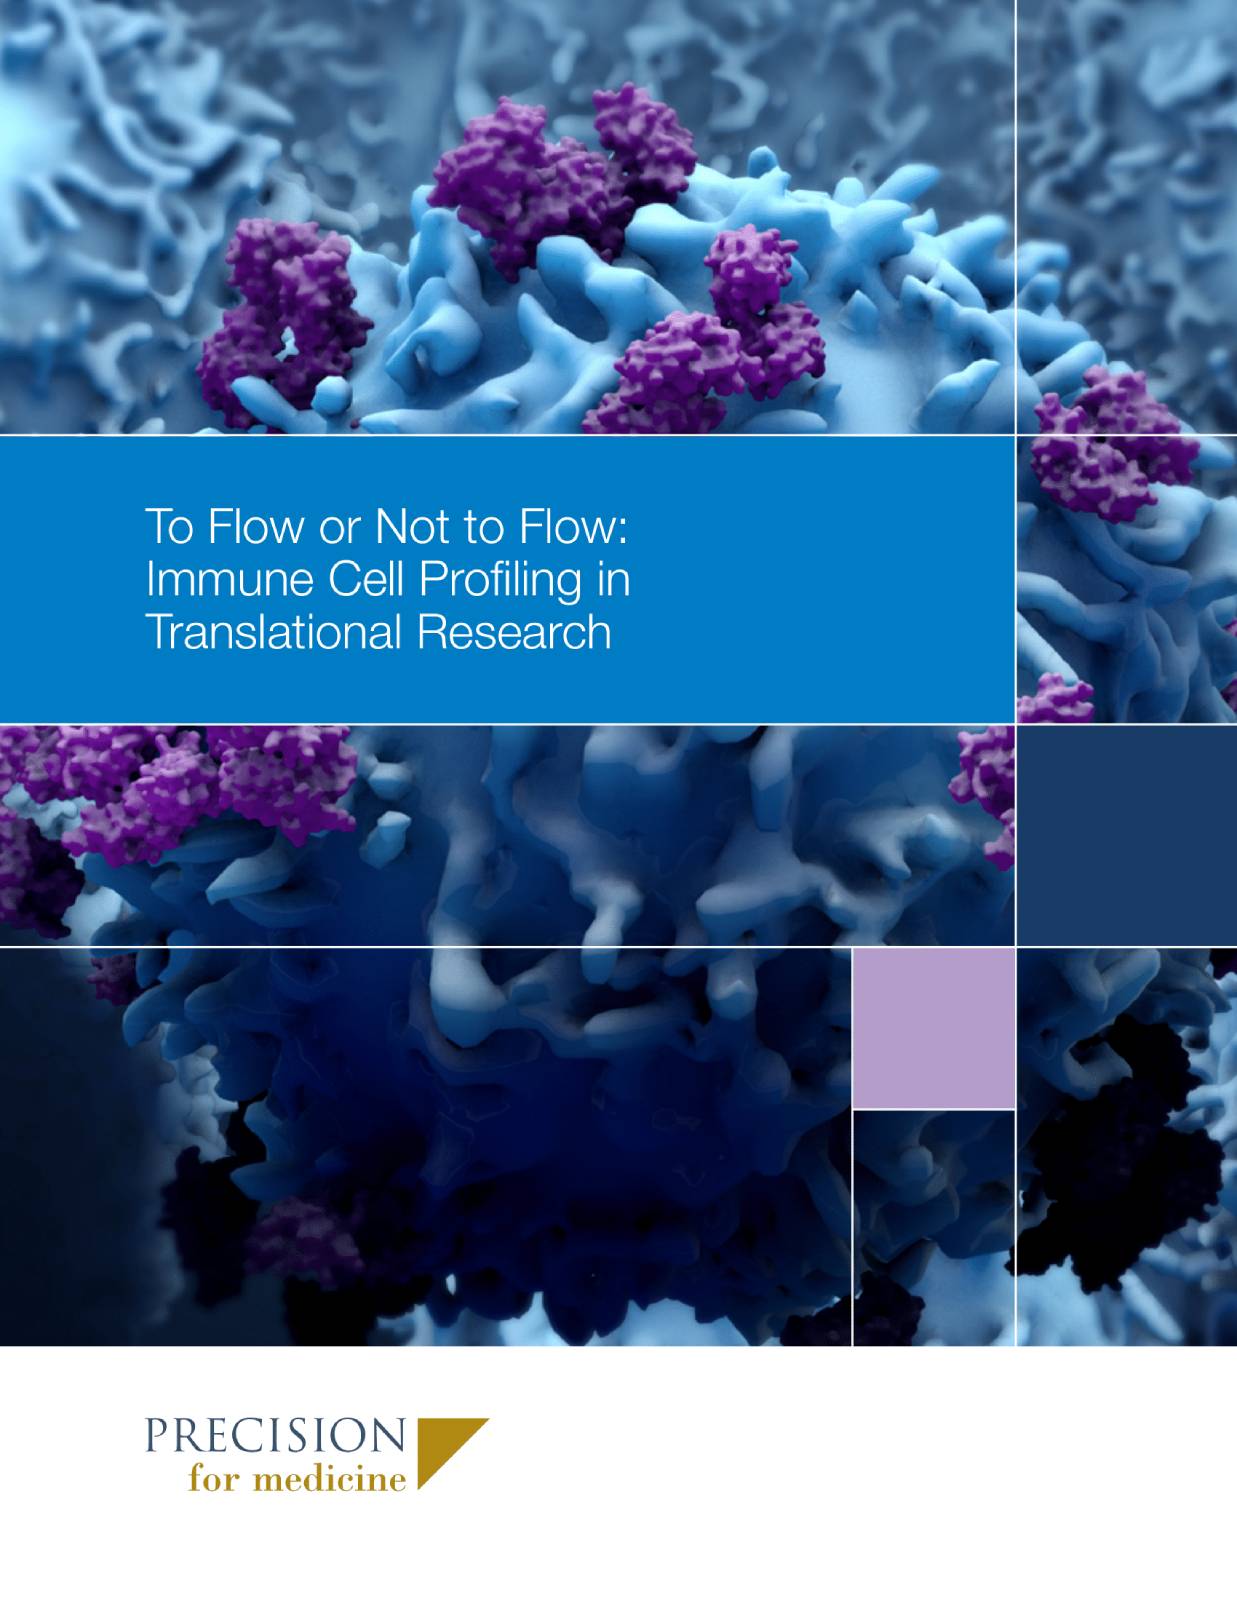 Front cover of immune cell profiling in translational research white paper download